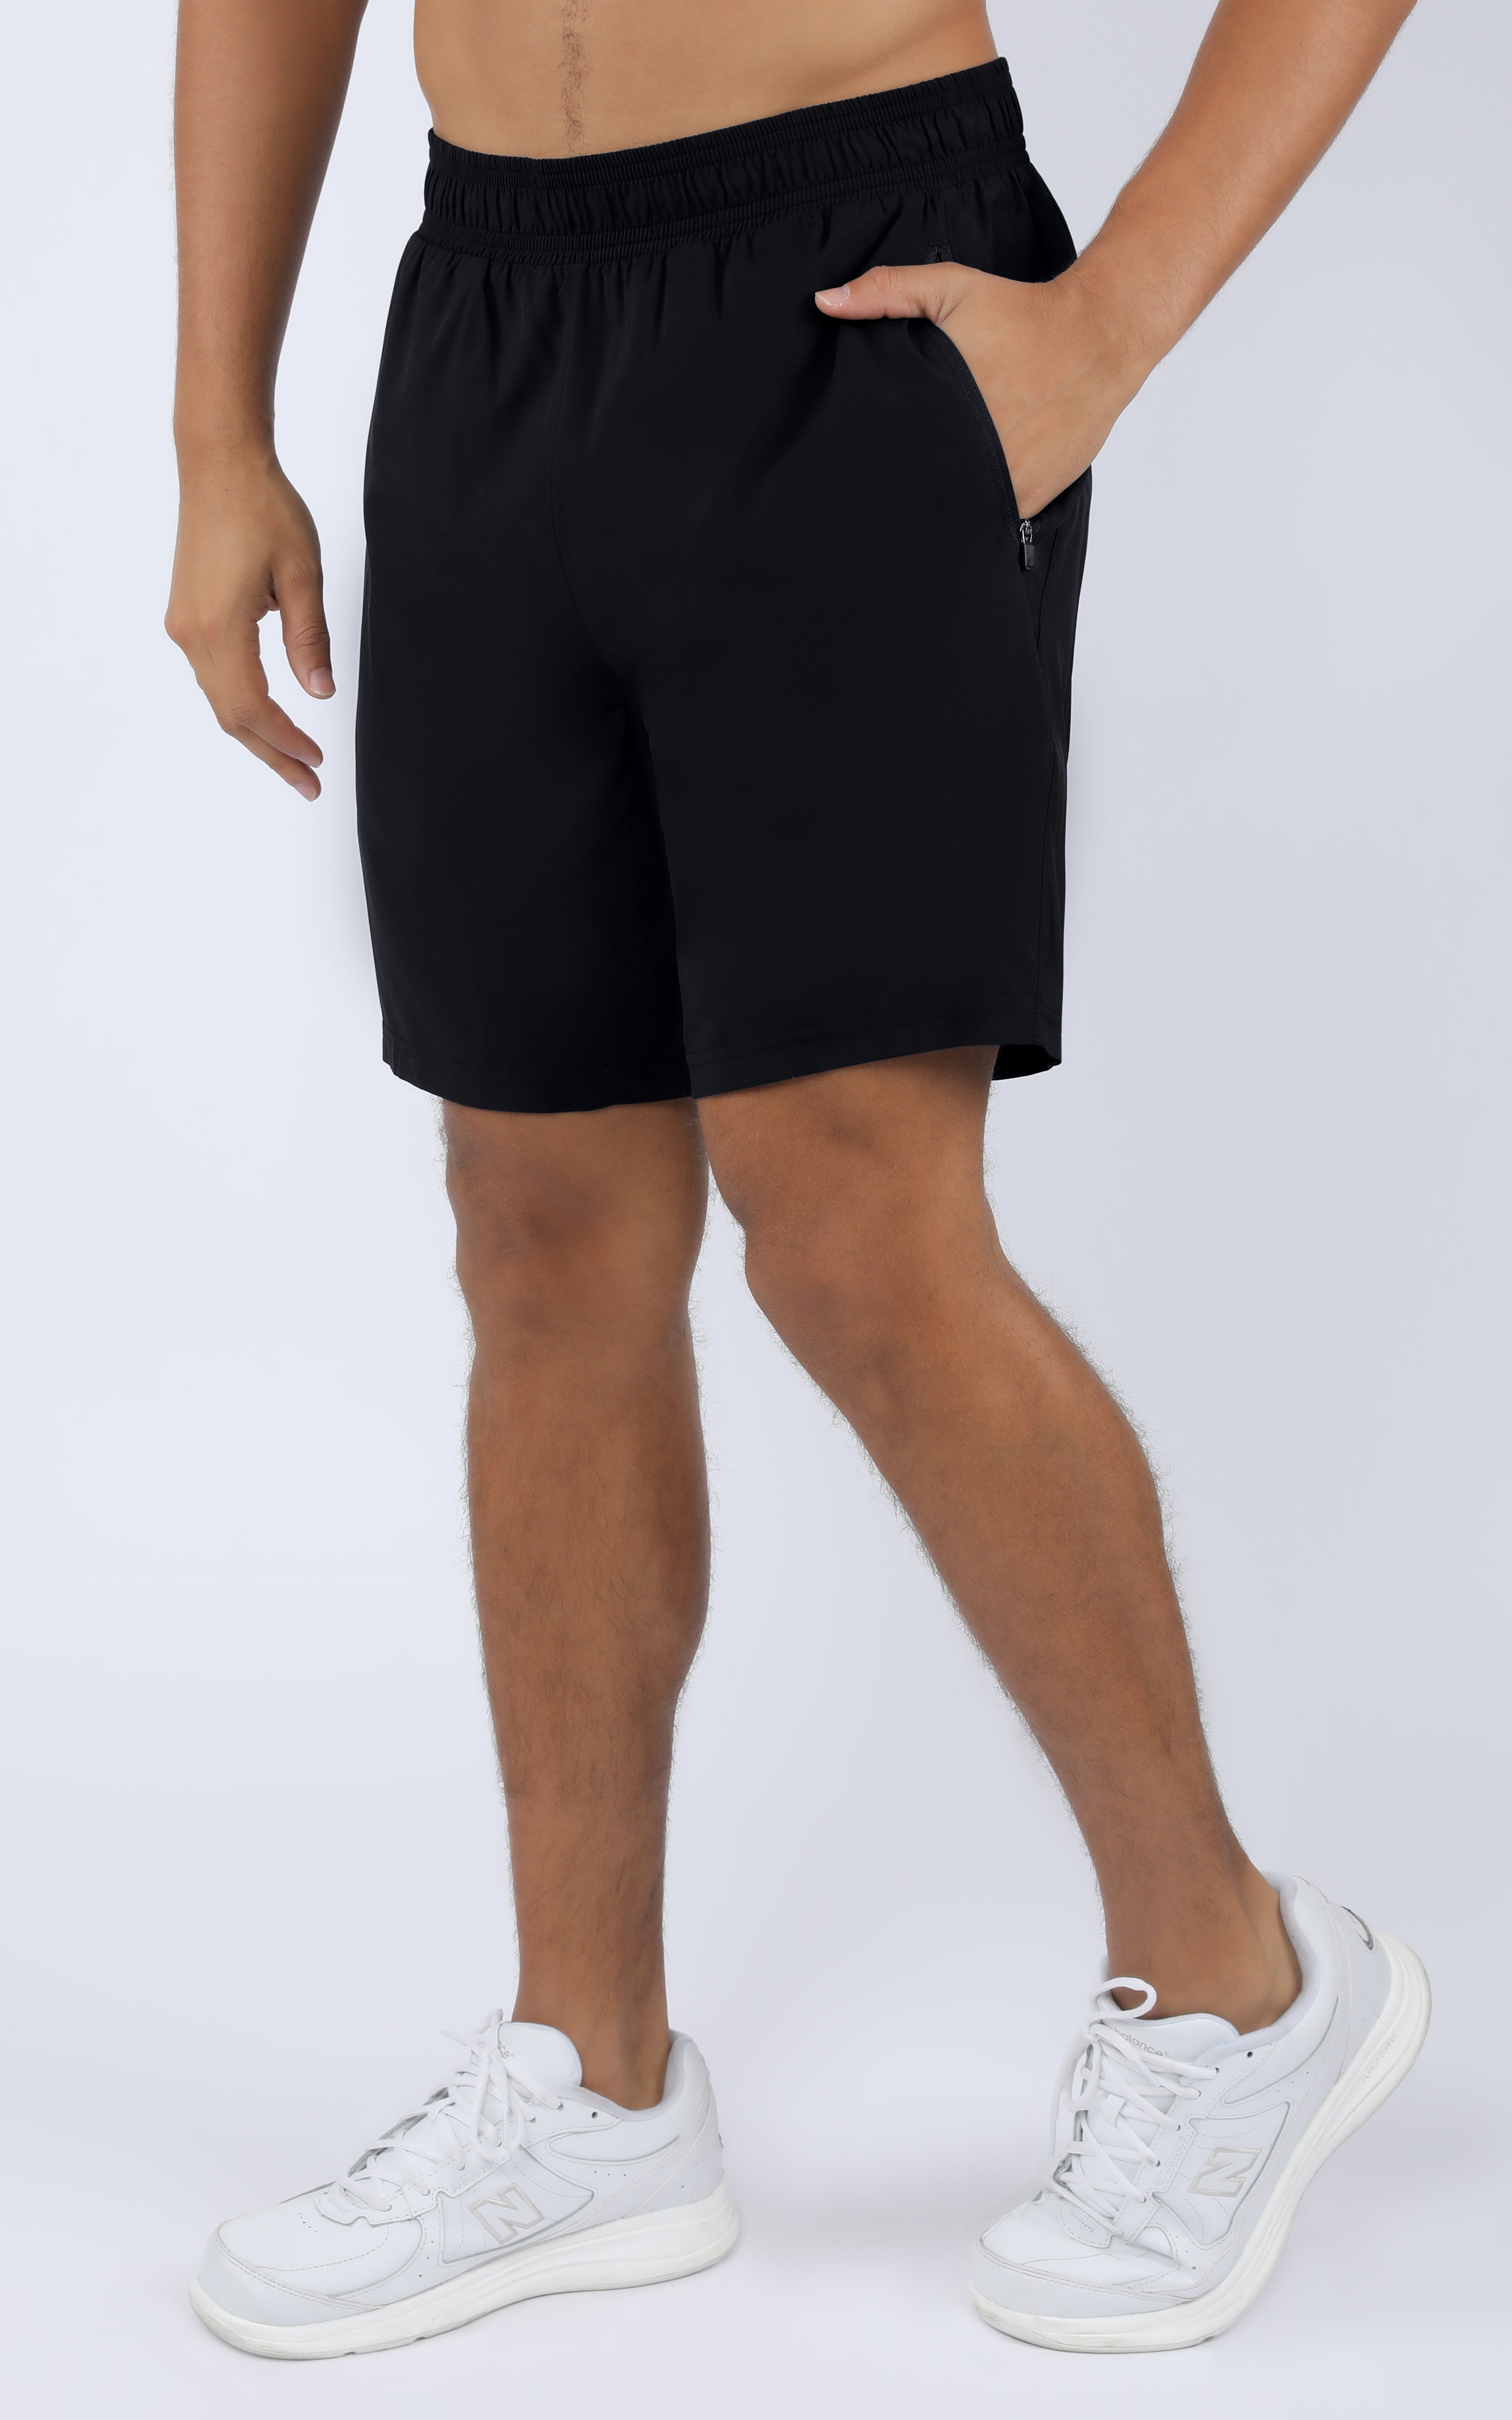 Mens Woven Shorts with Zipper Pockets